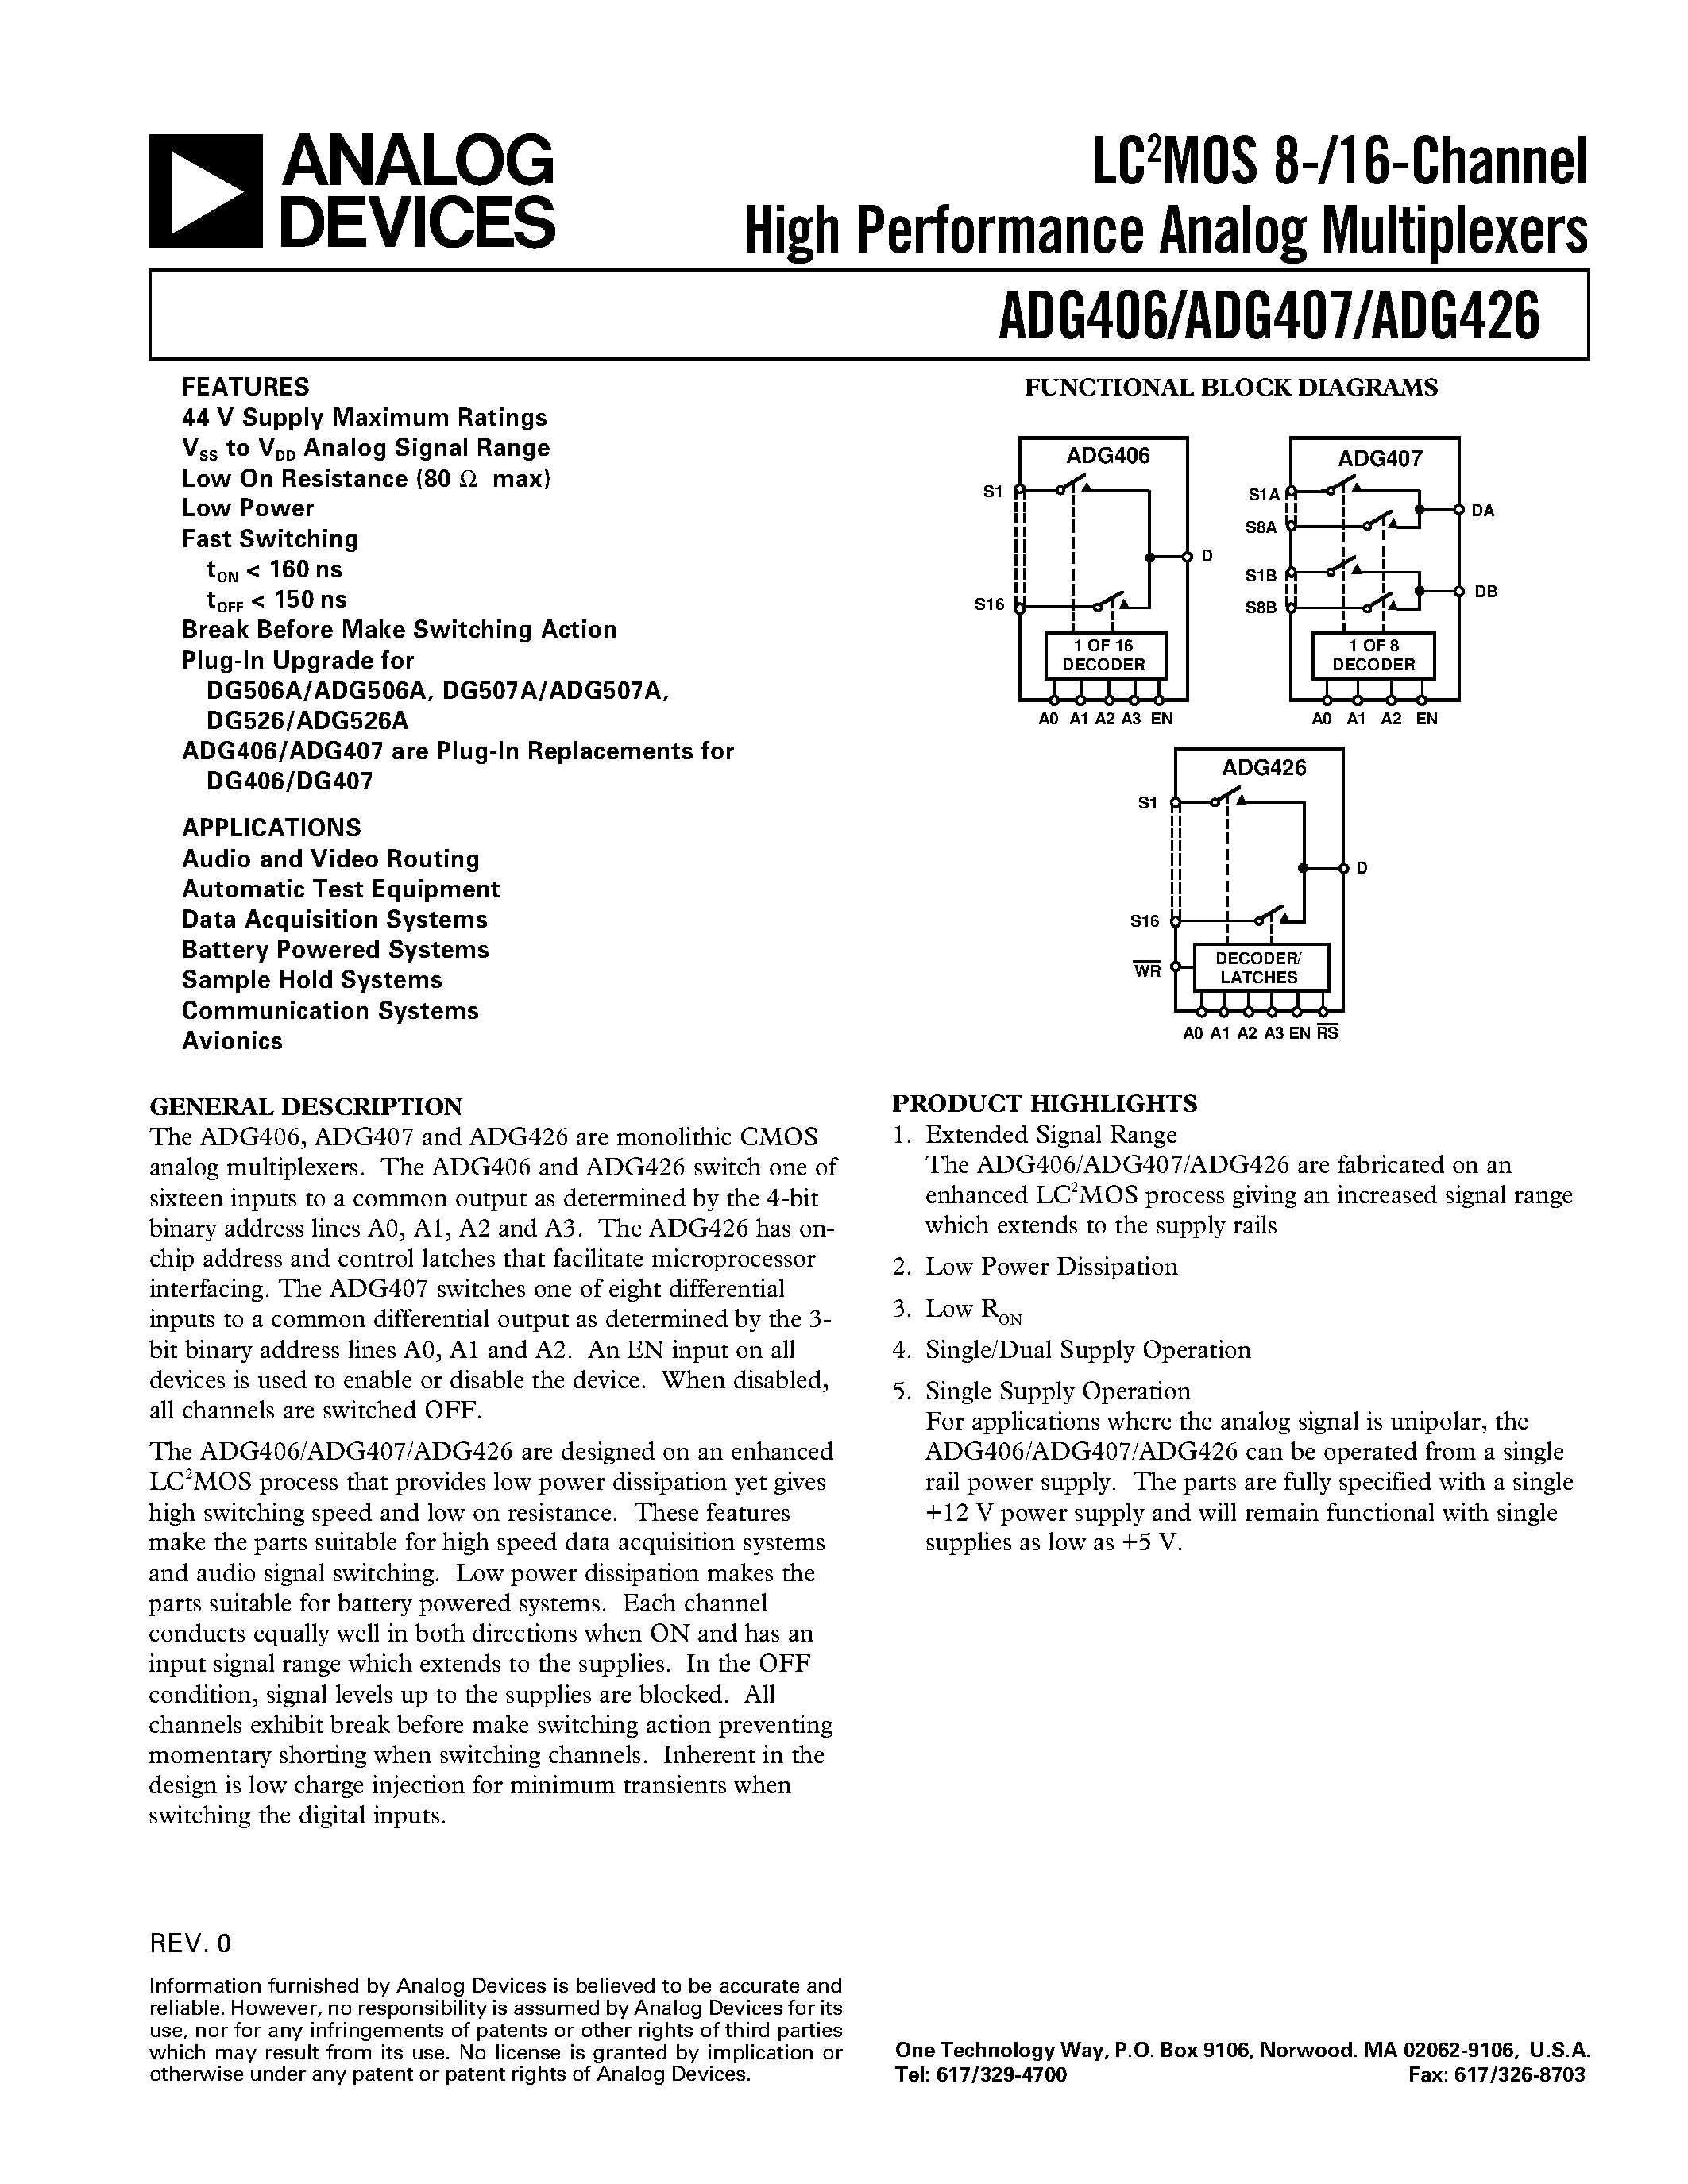 Datasheet ADG407BP - LC2MOS 8-/16-Channel High Performance Analog Multiplexers page 1